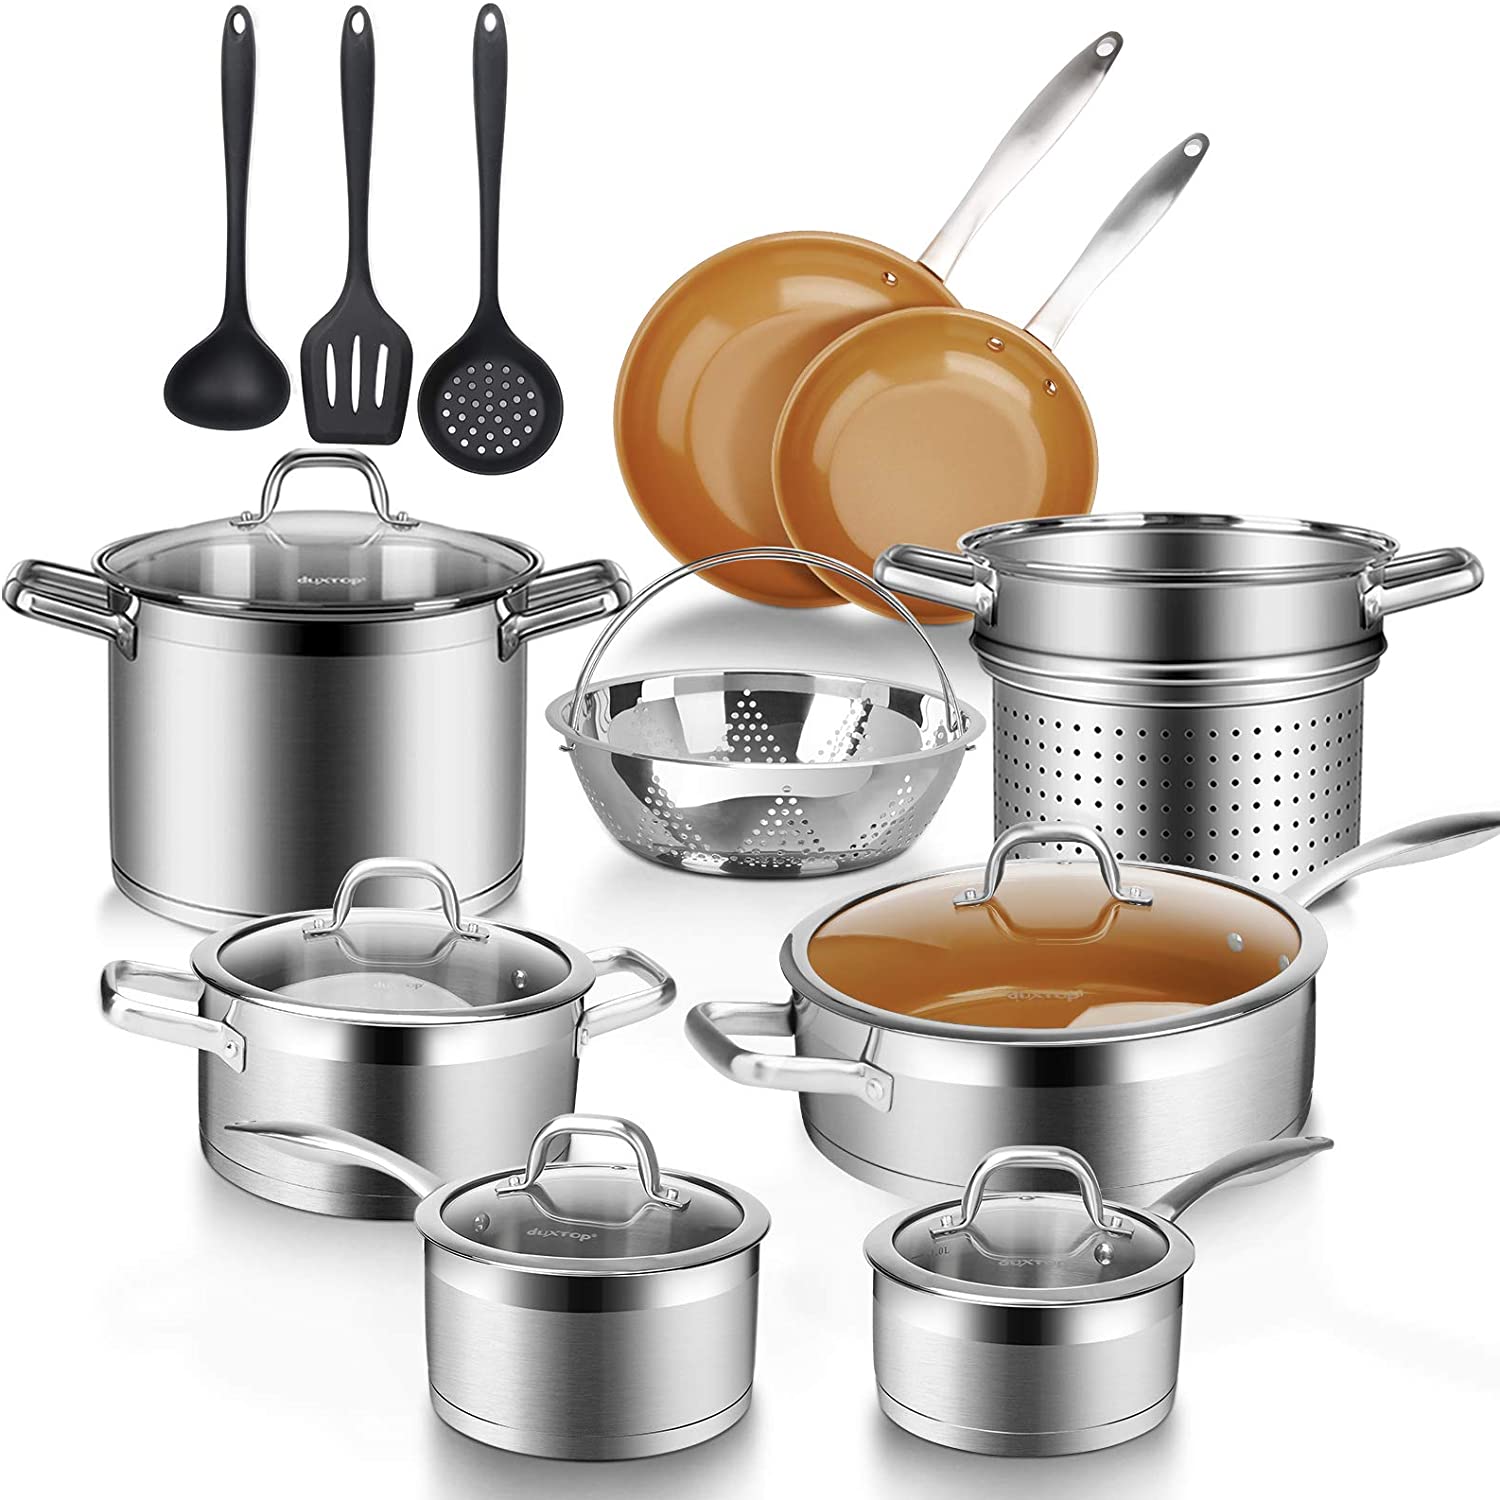 Duxtop 17 piece professional stainless steel pots and pans set